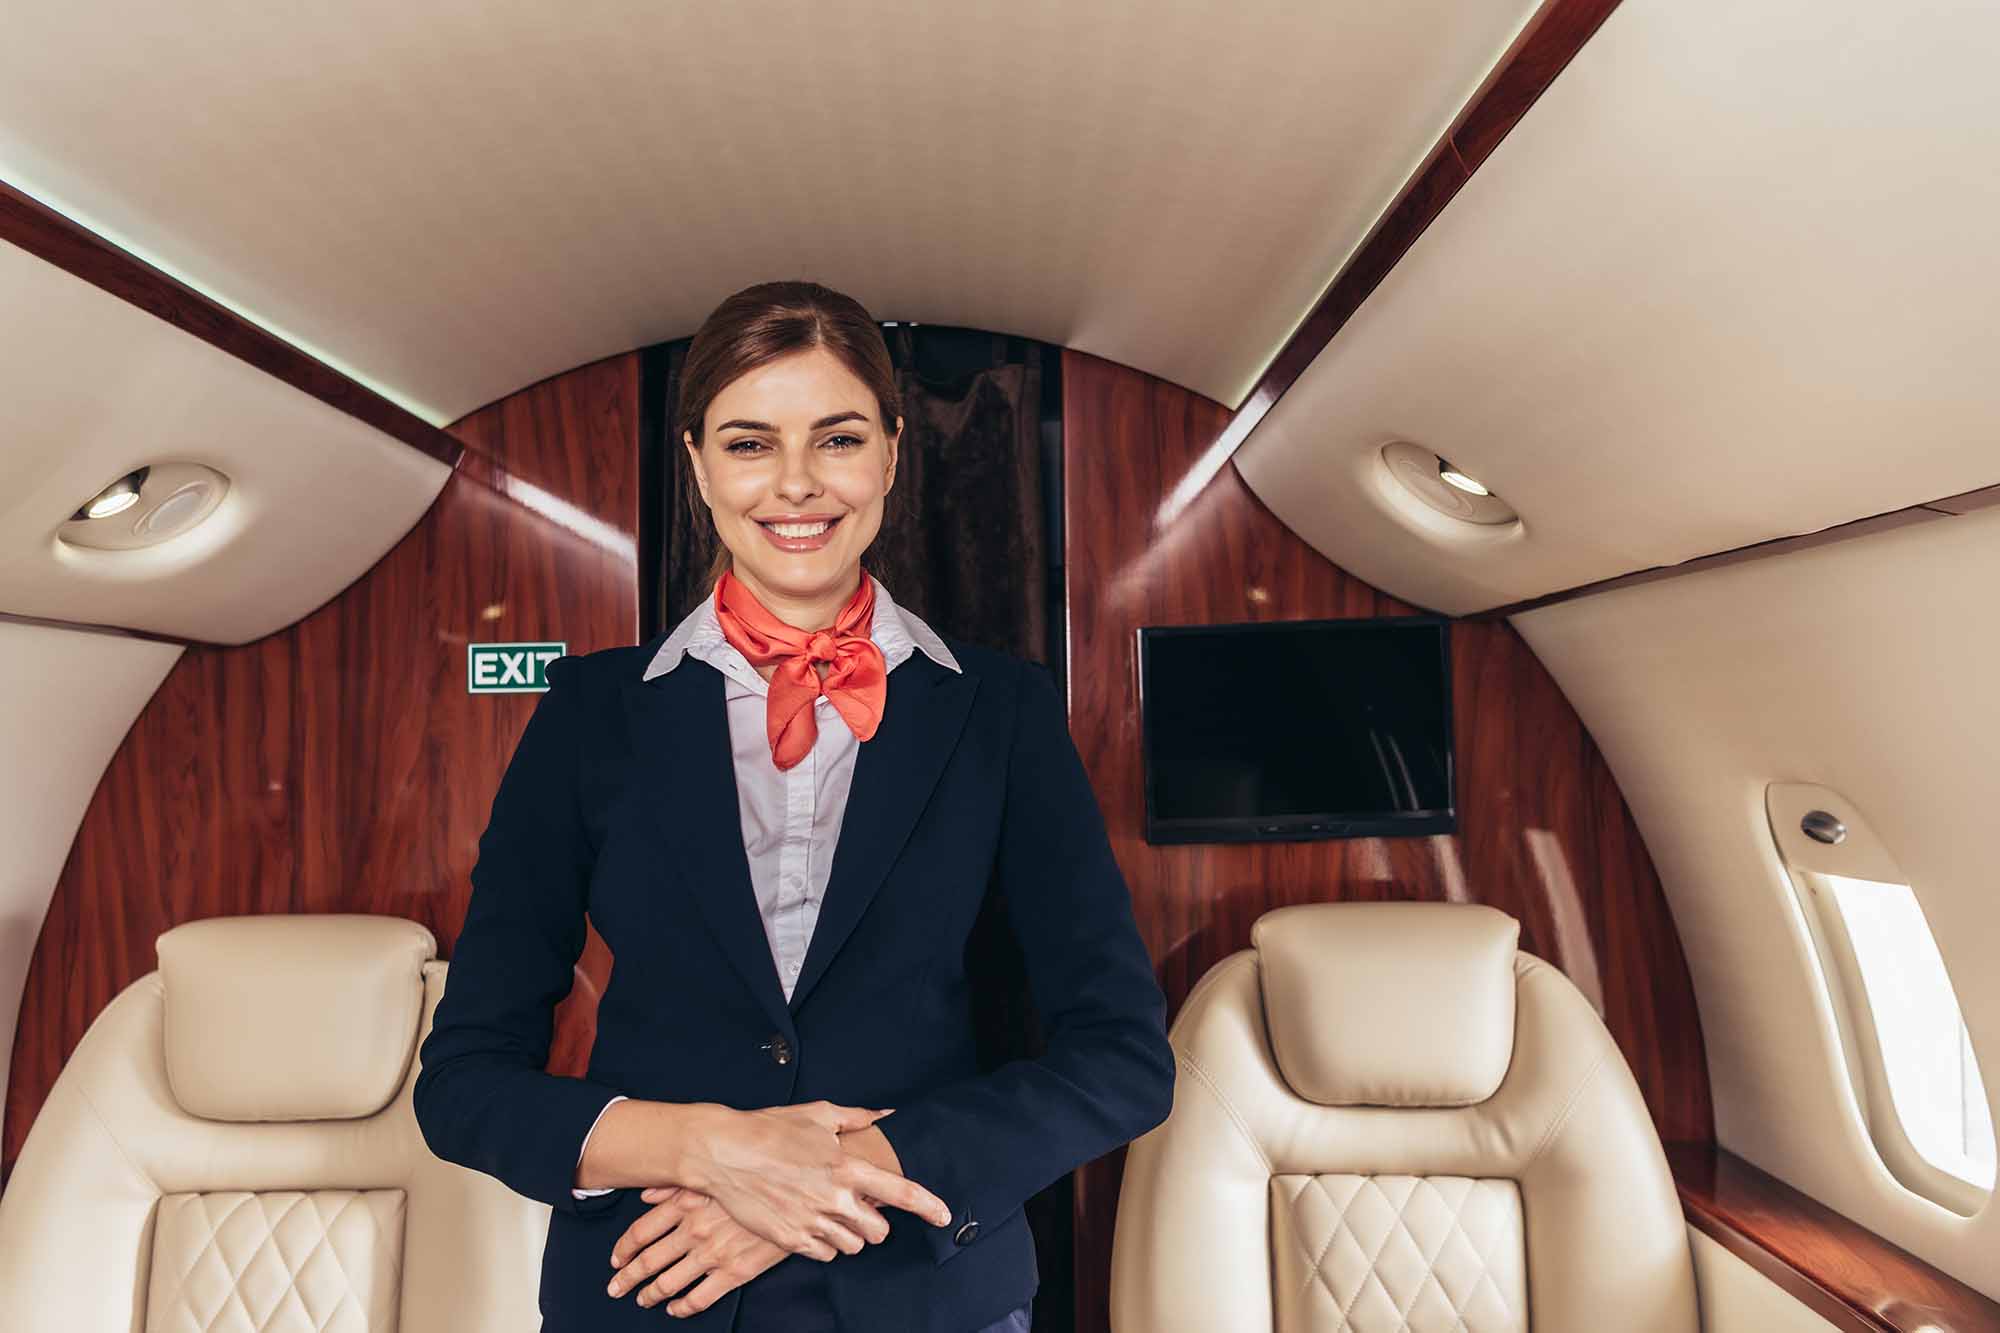 Flight attendants reveal how some passengers manage to sneak into first class for free.